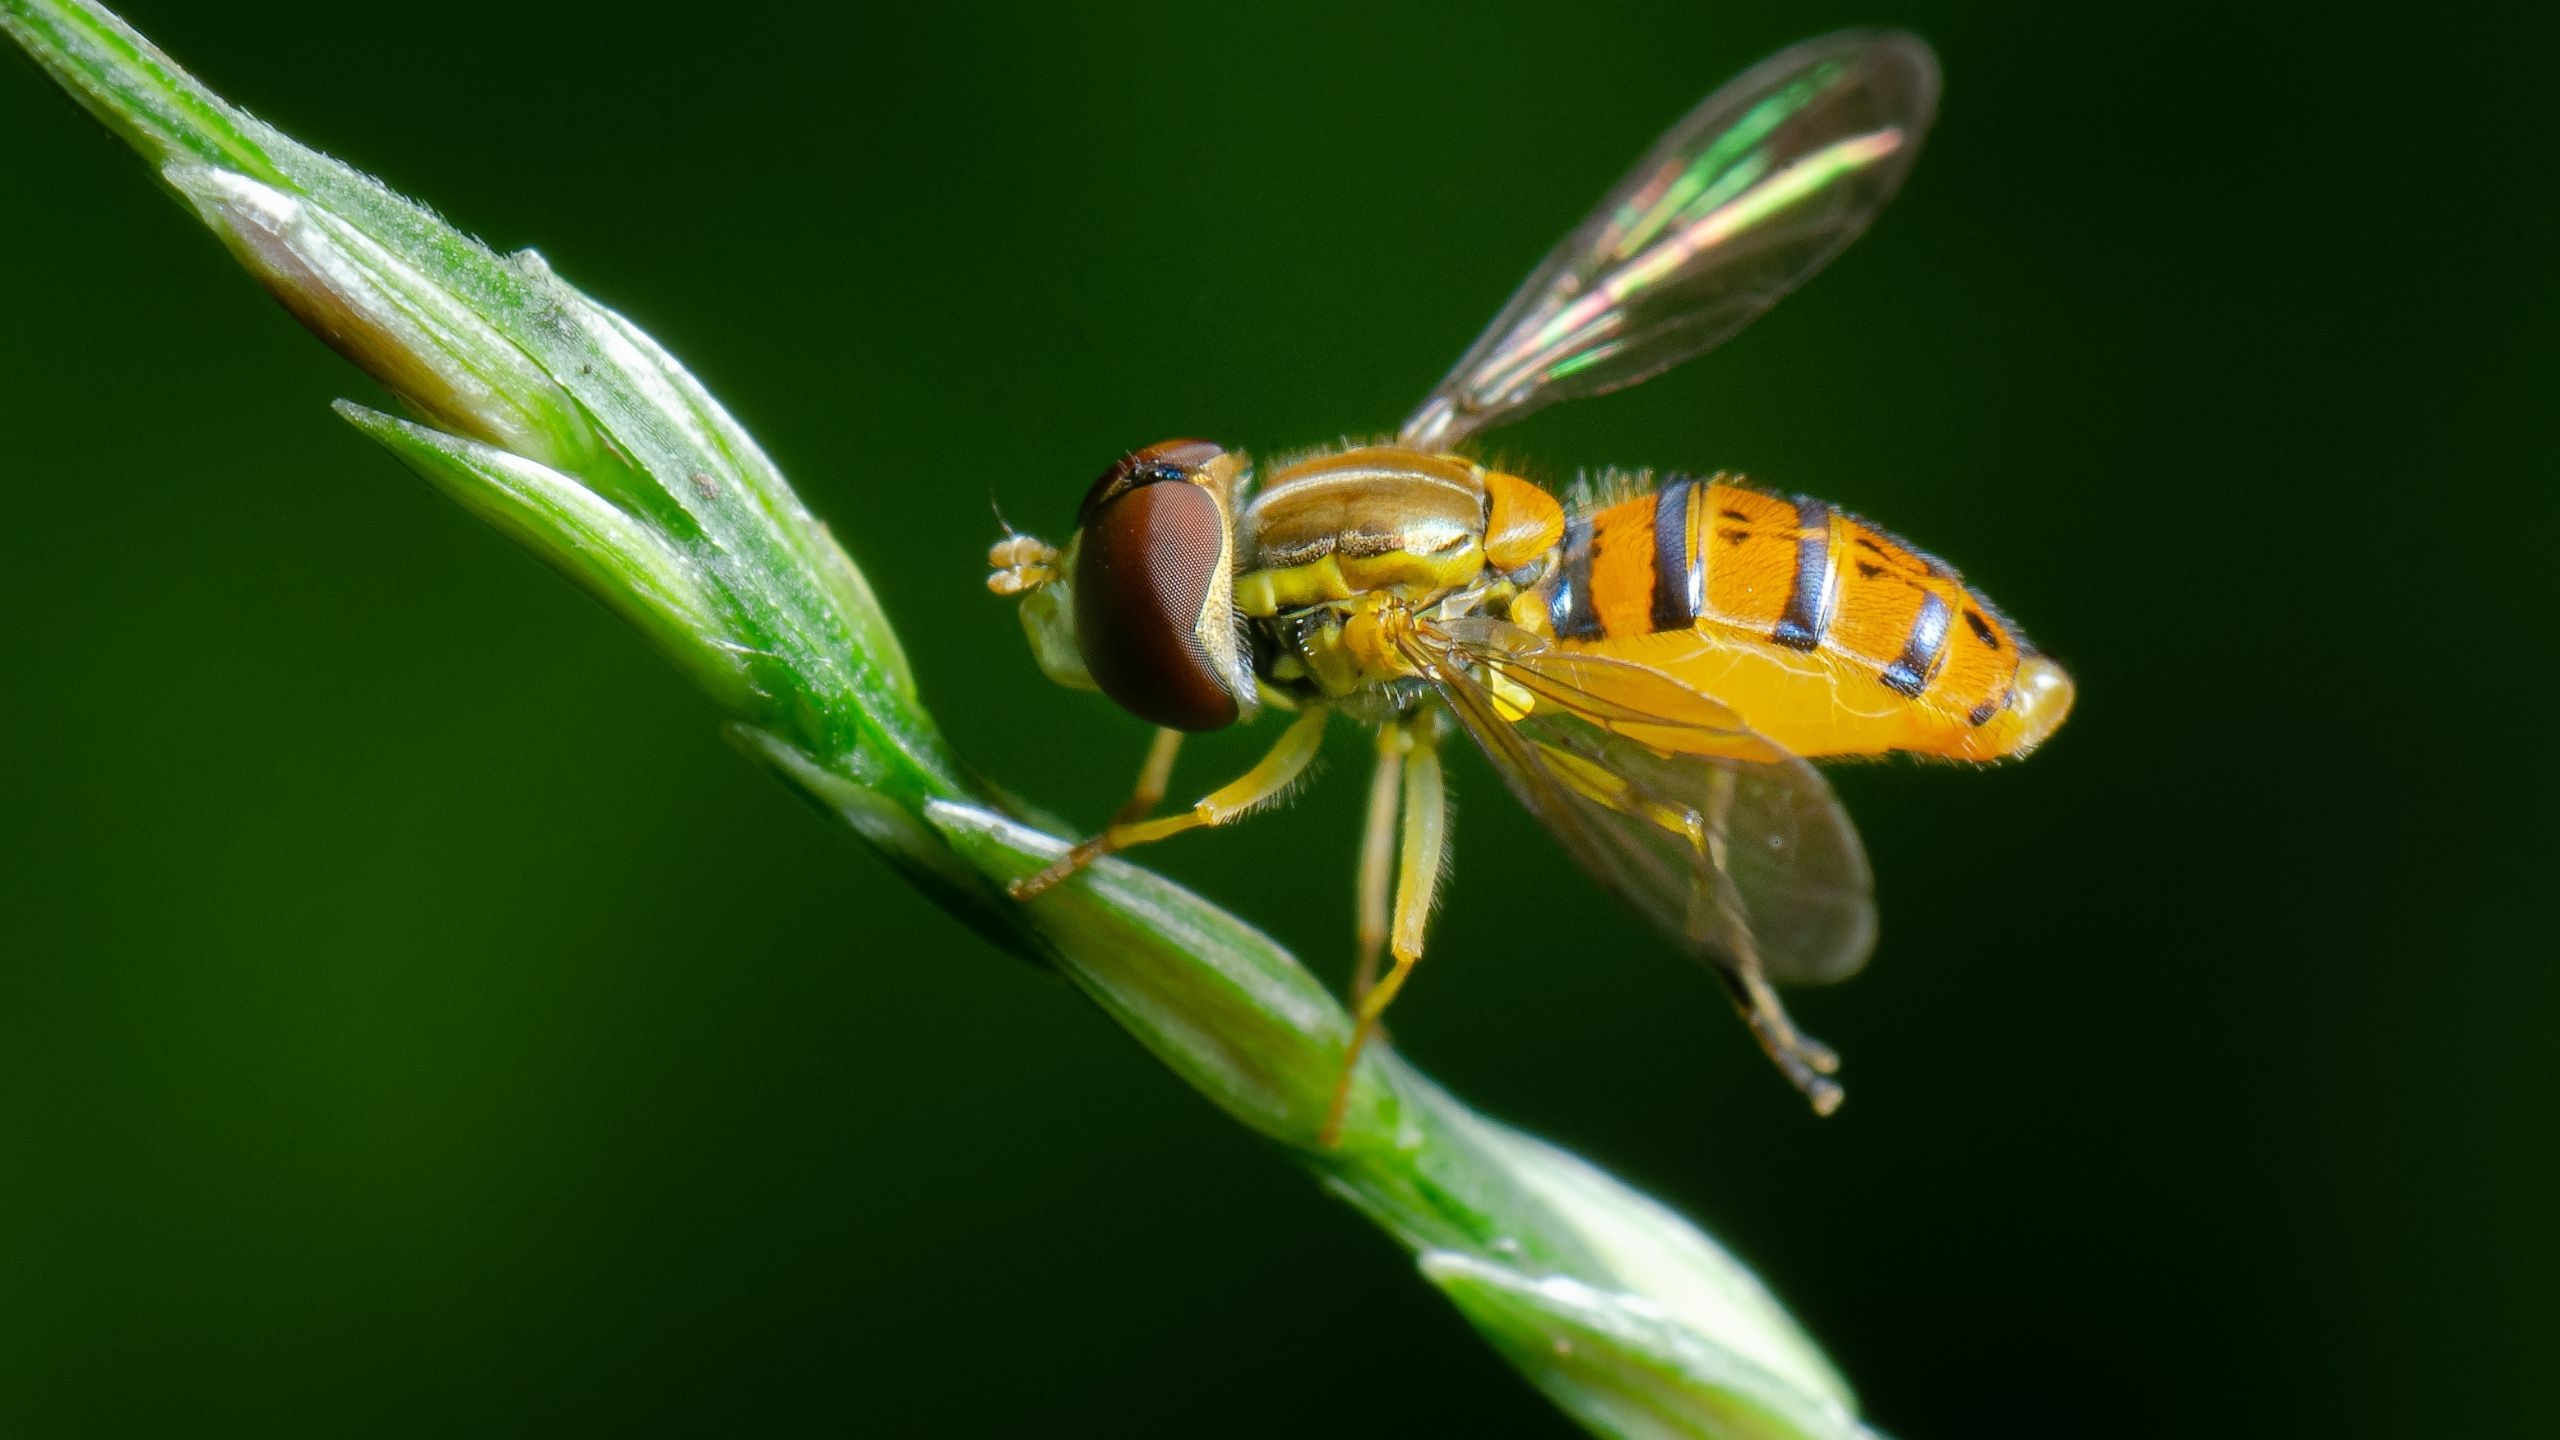 An adult syrphid fly on a grass stem.